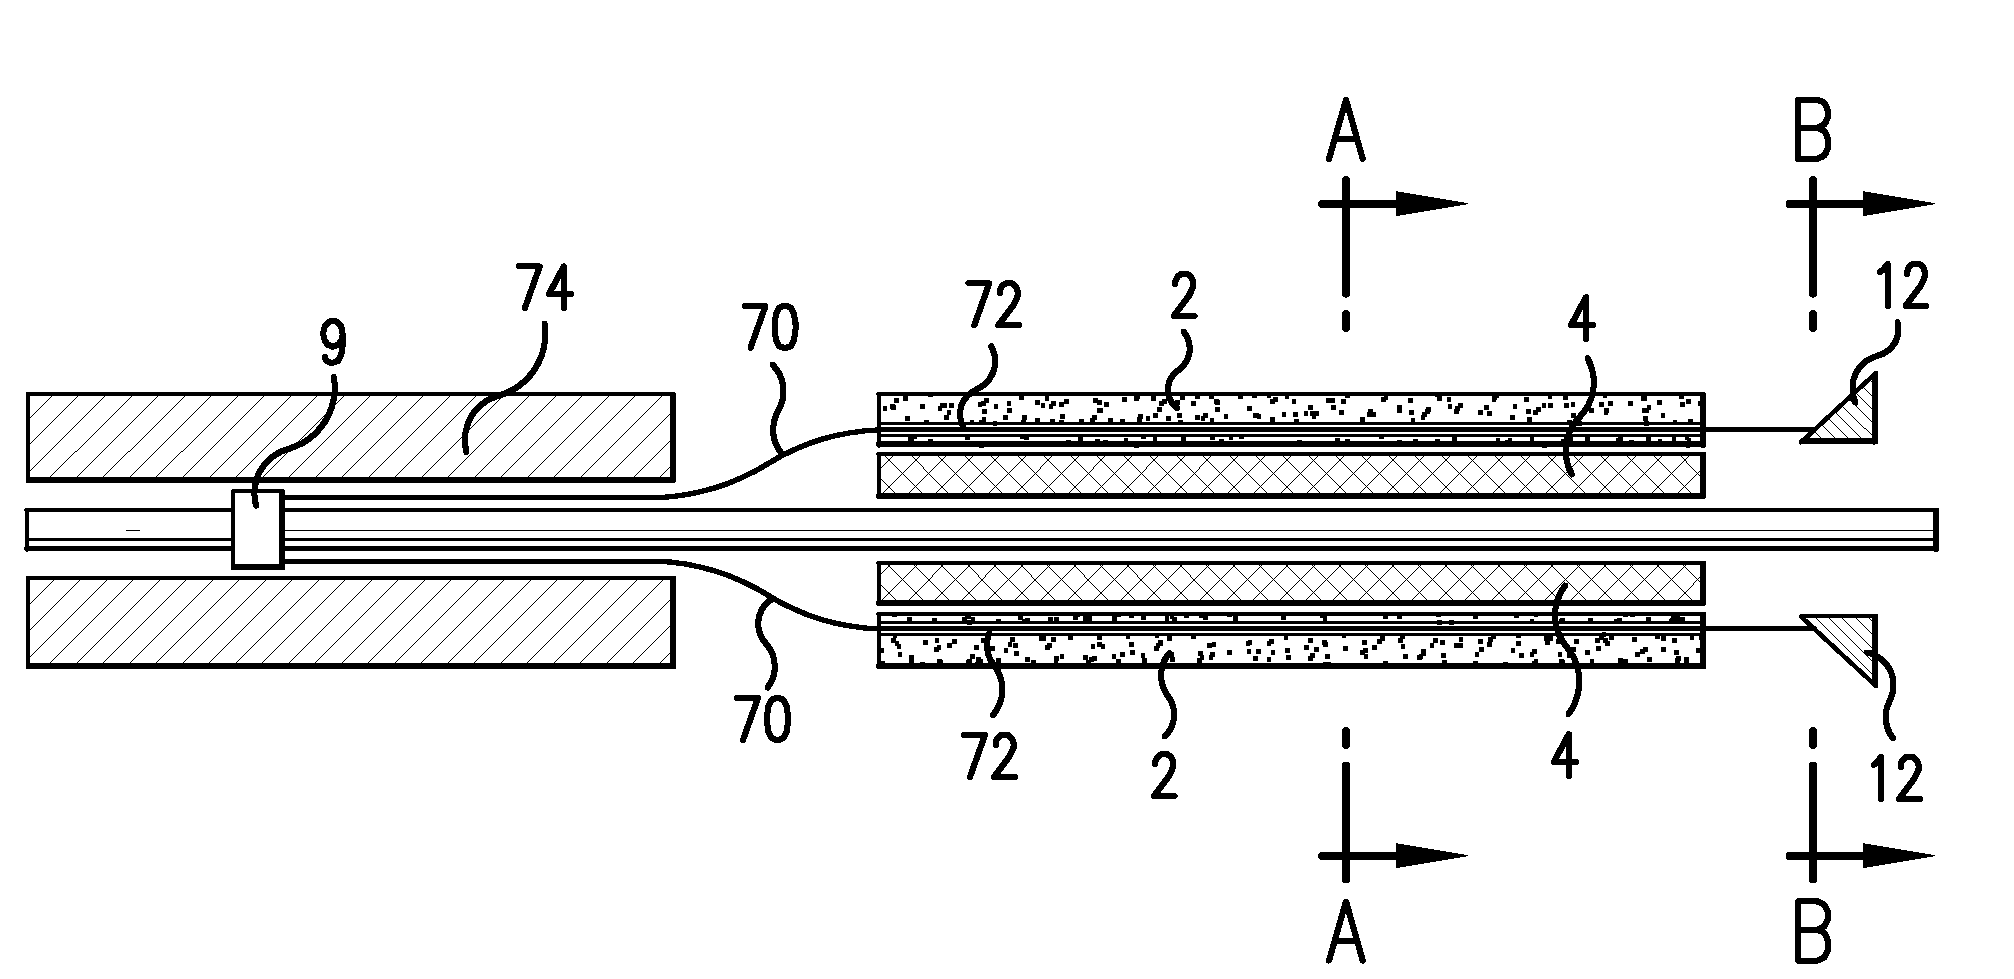 Self-expandable stent with a constrictive coating and method of use